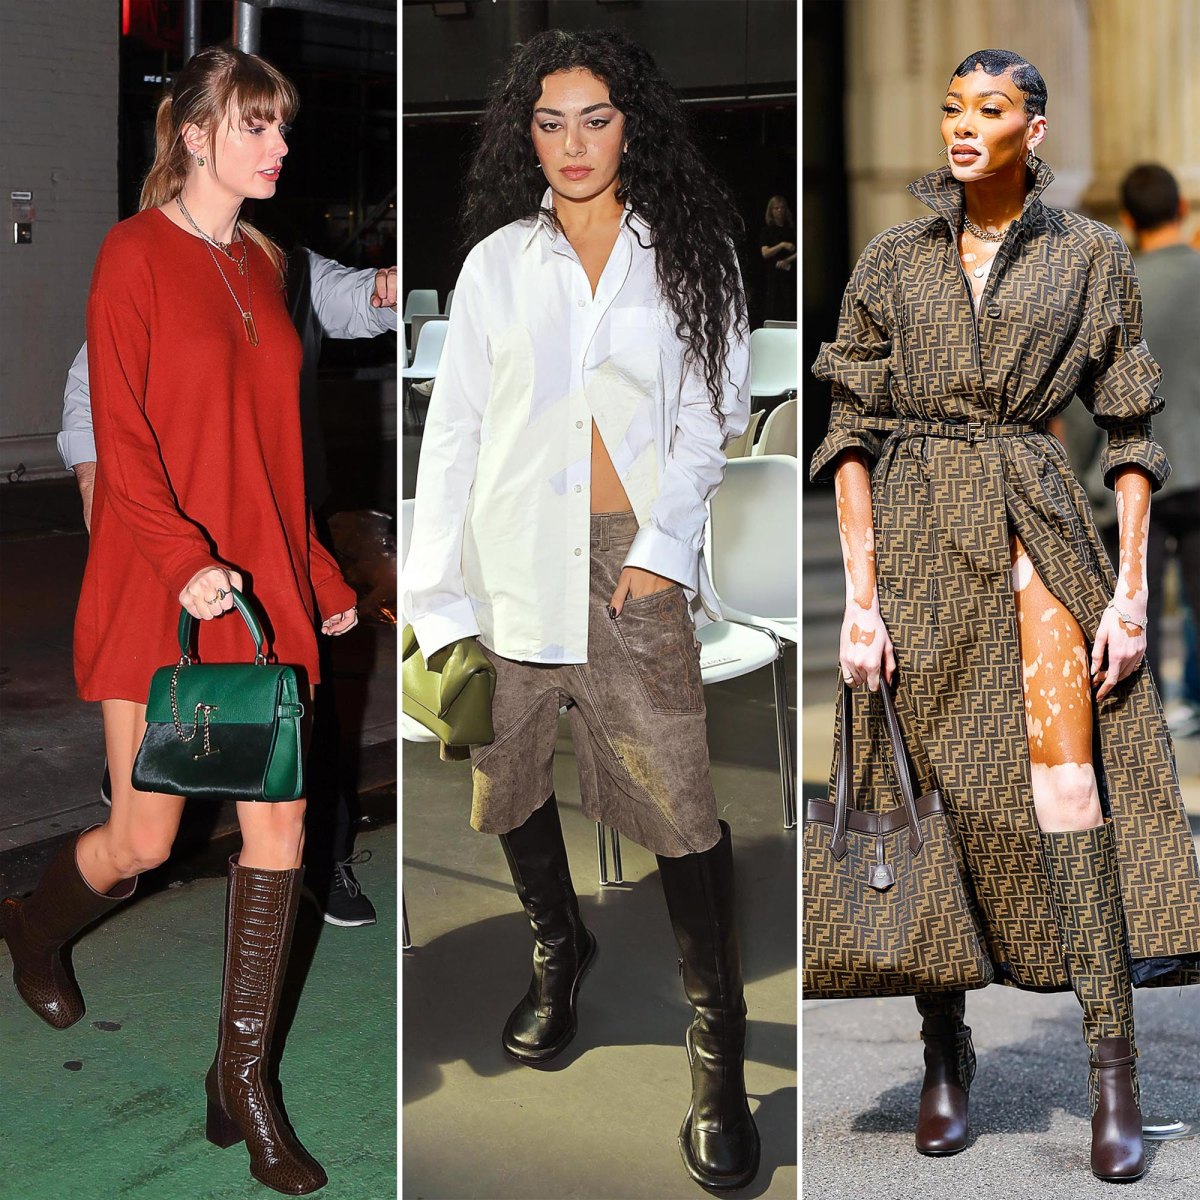 How To Wear Slouchy Knee-High Boots This Fall - The Mom Edit